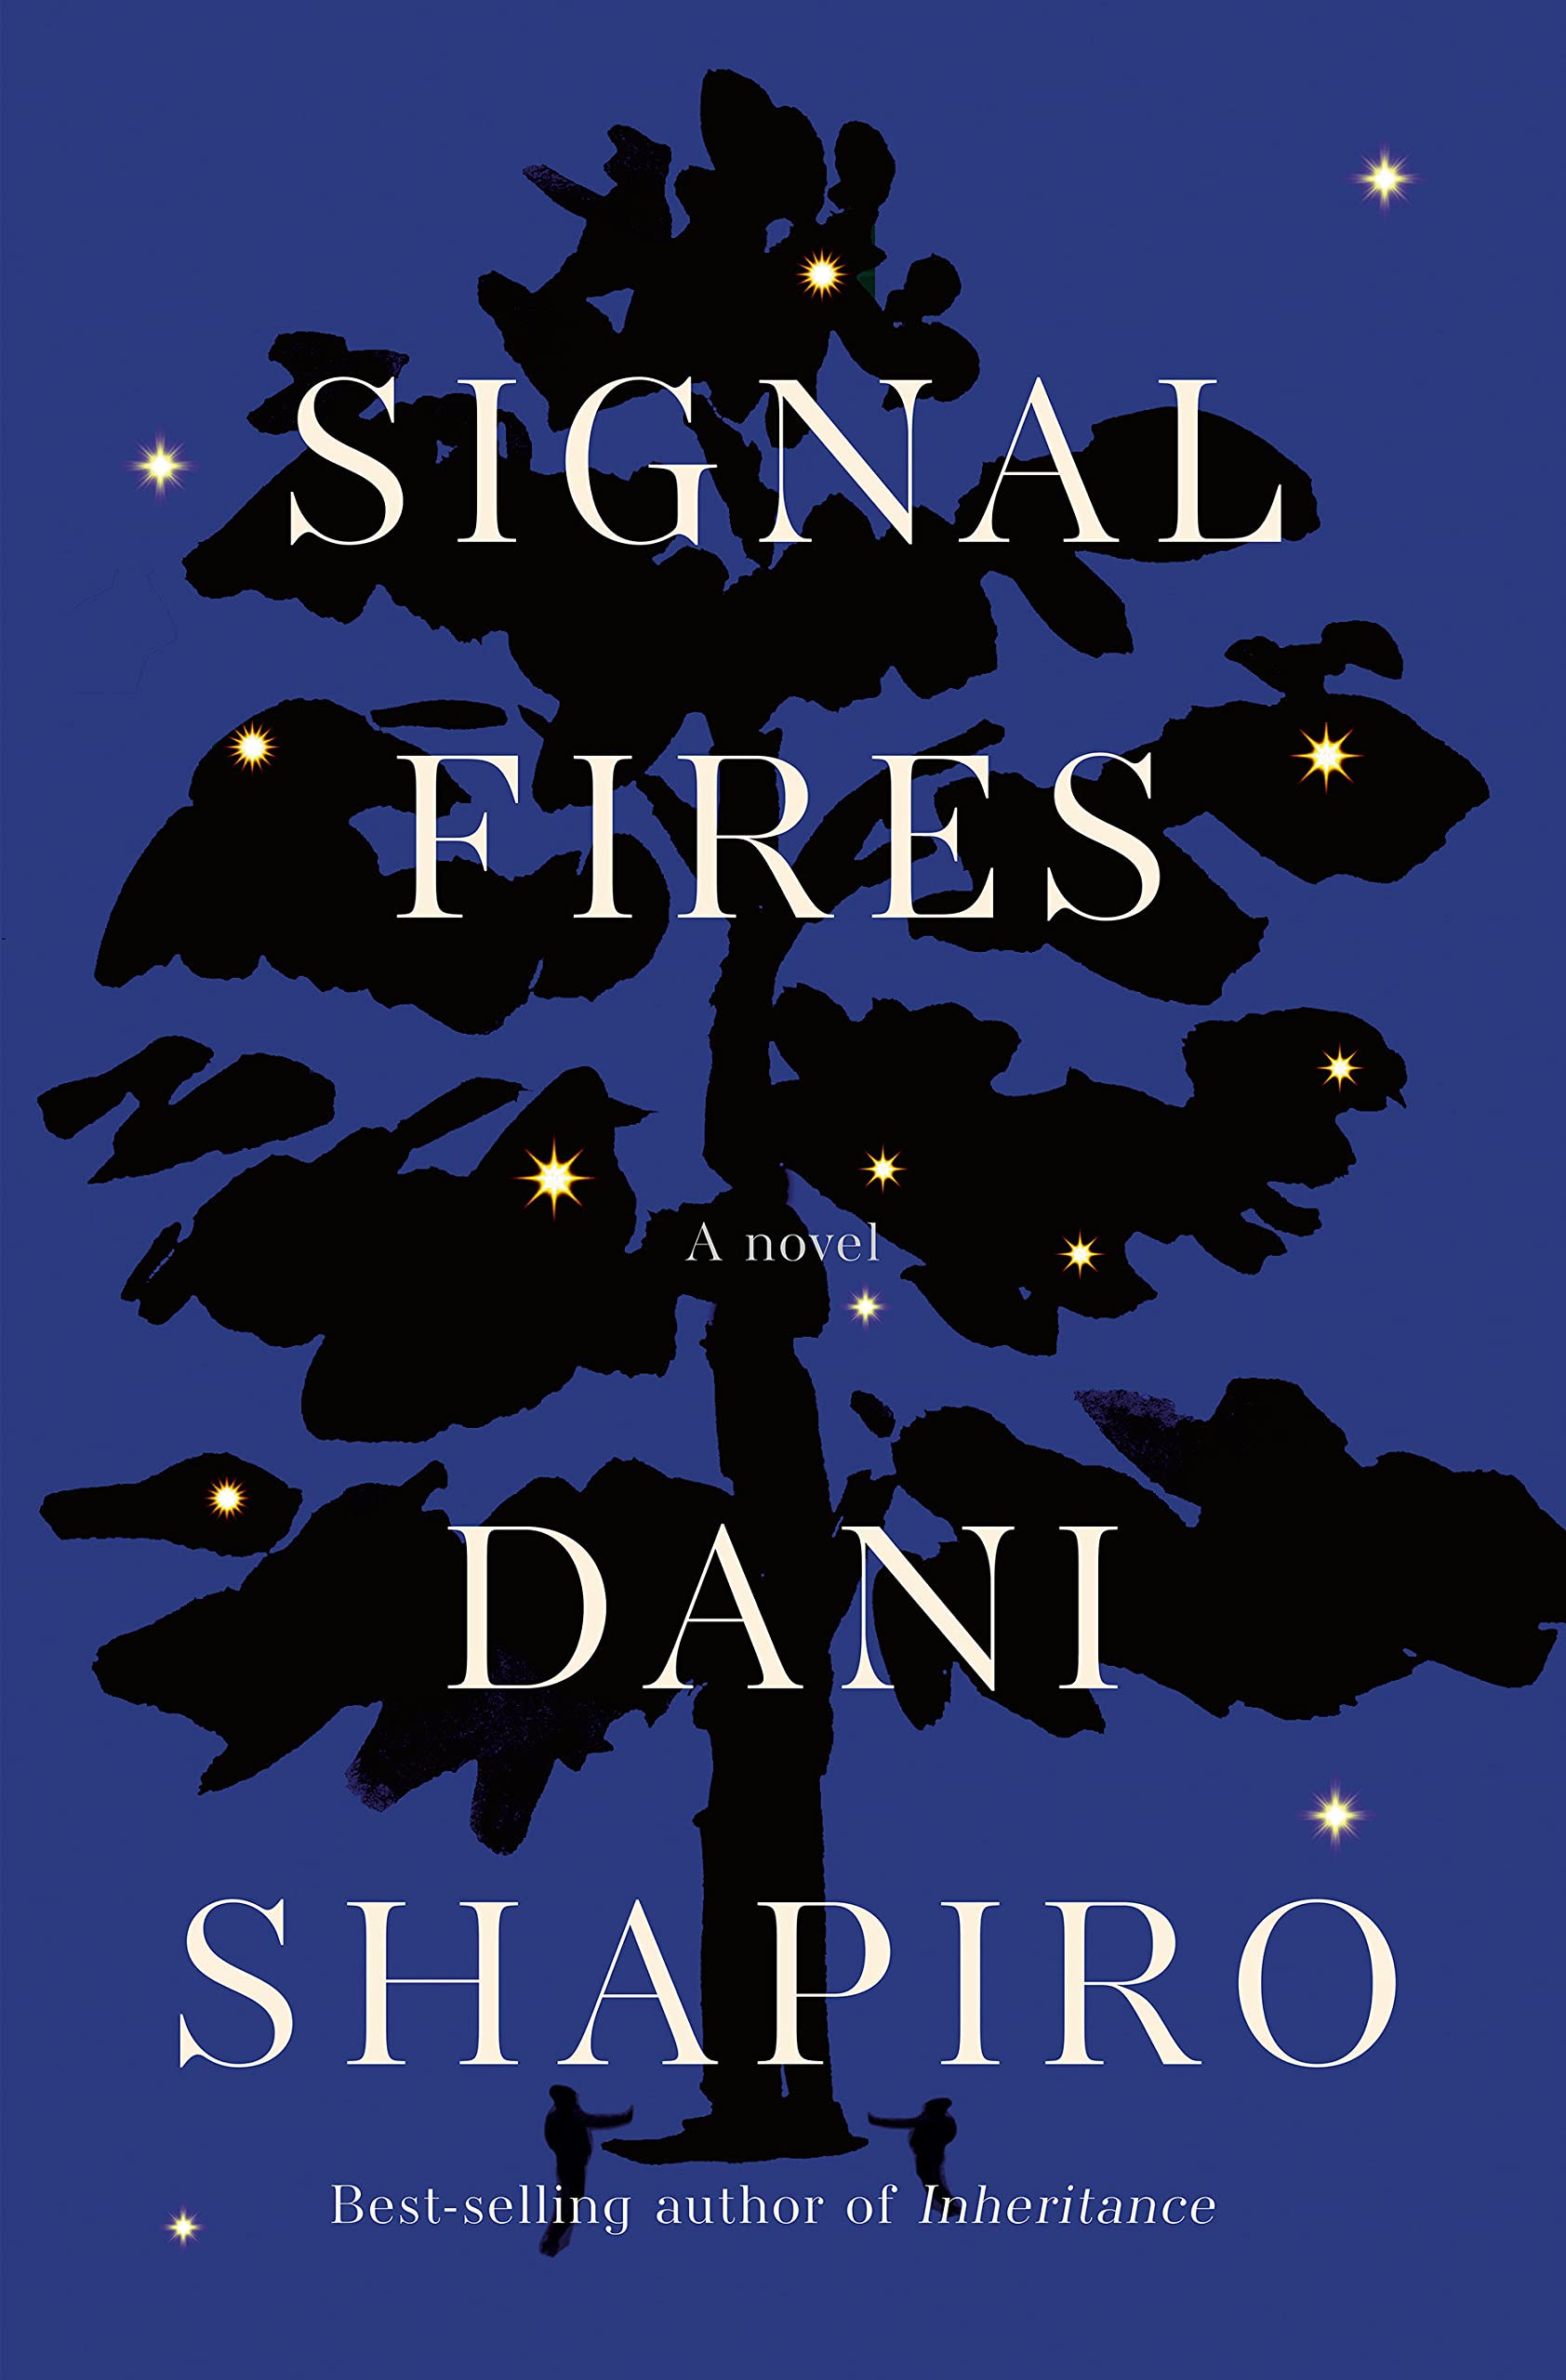 Image for "Signal Fires"